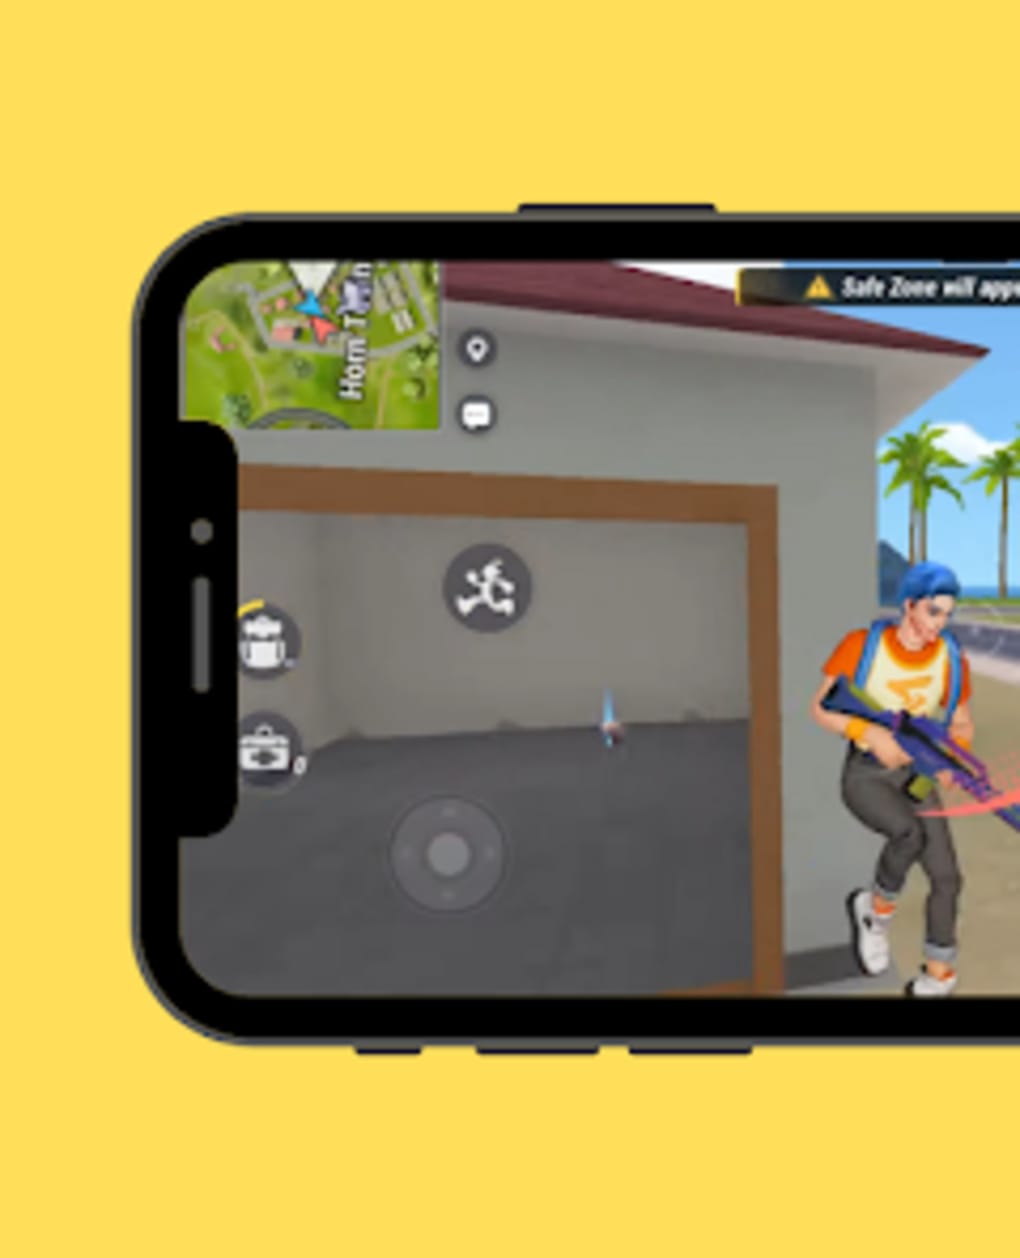 Sigma Battle Royale APK Download Free for Android